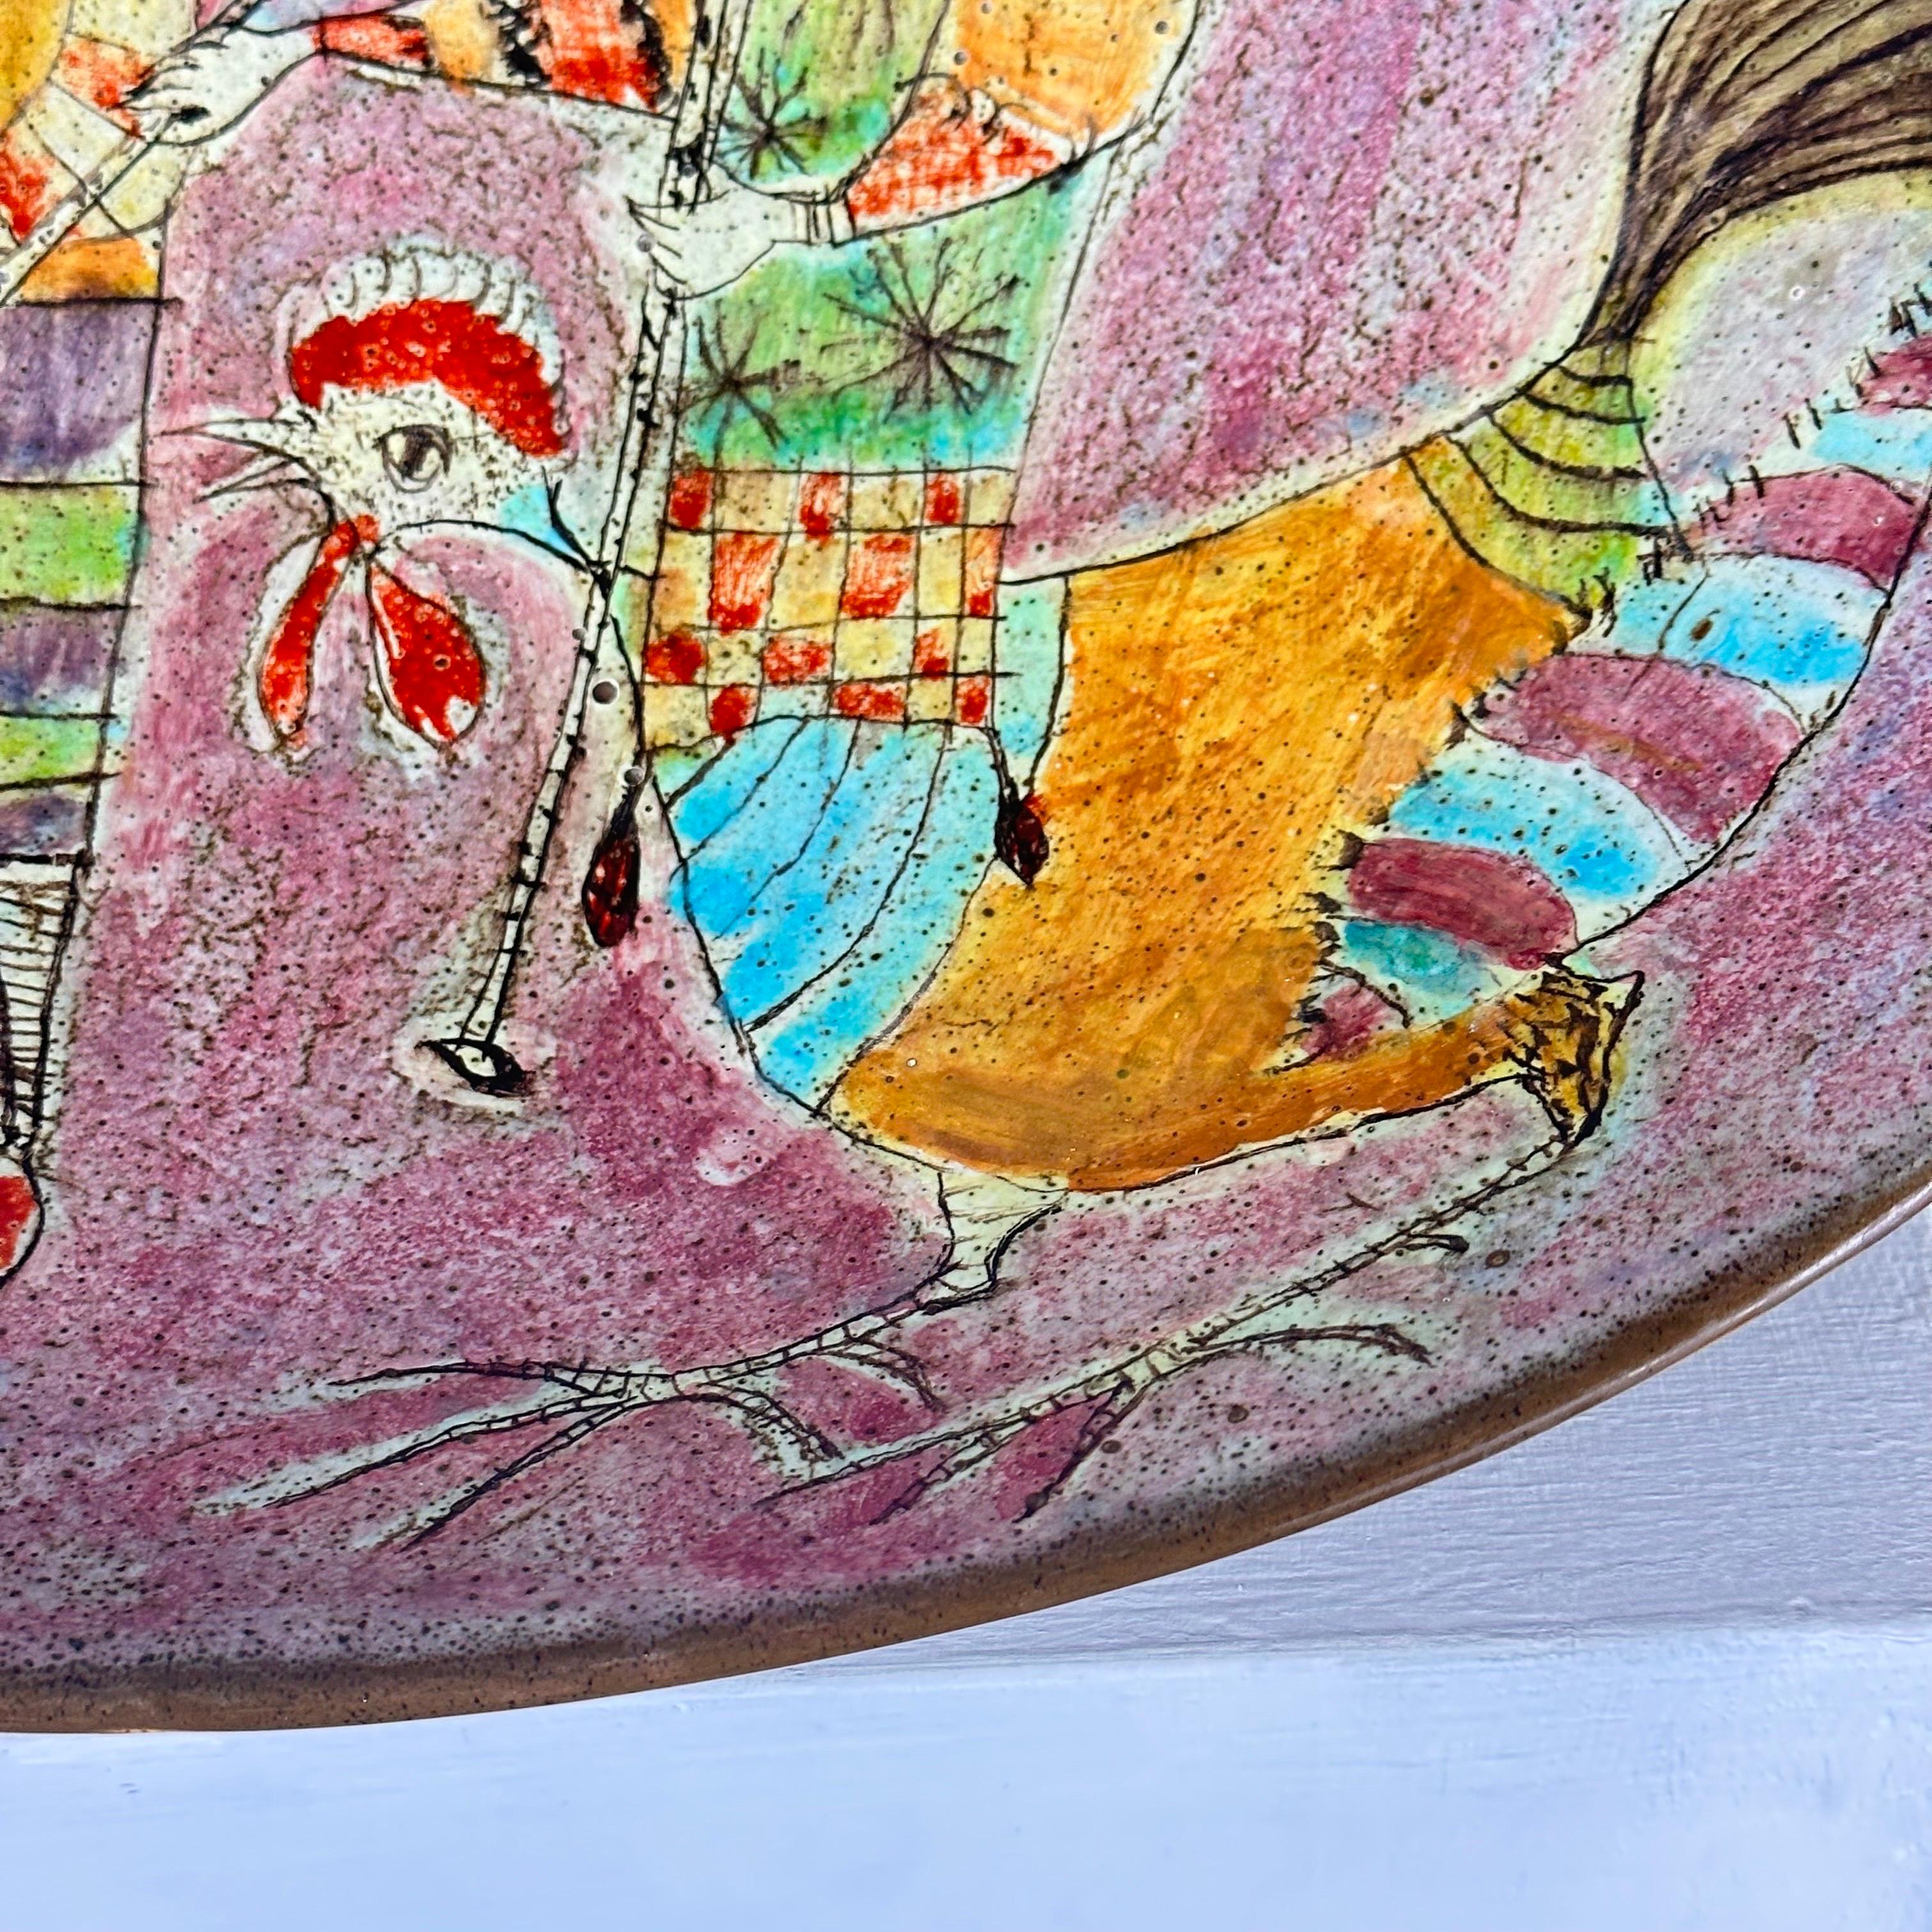 Whimsical Hand-Painted Ceramic Plate by Baratti Pesaro, 1970s  For Sale 4